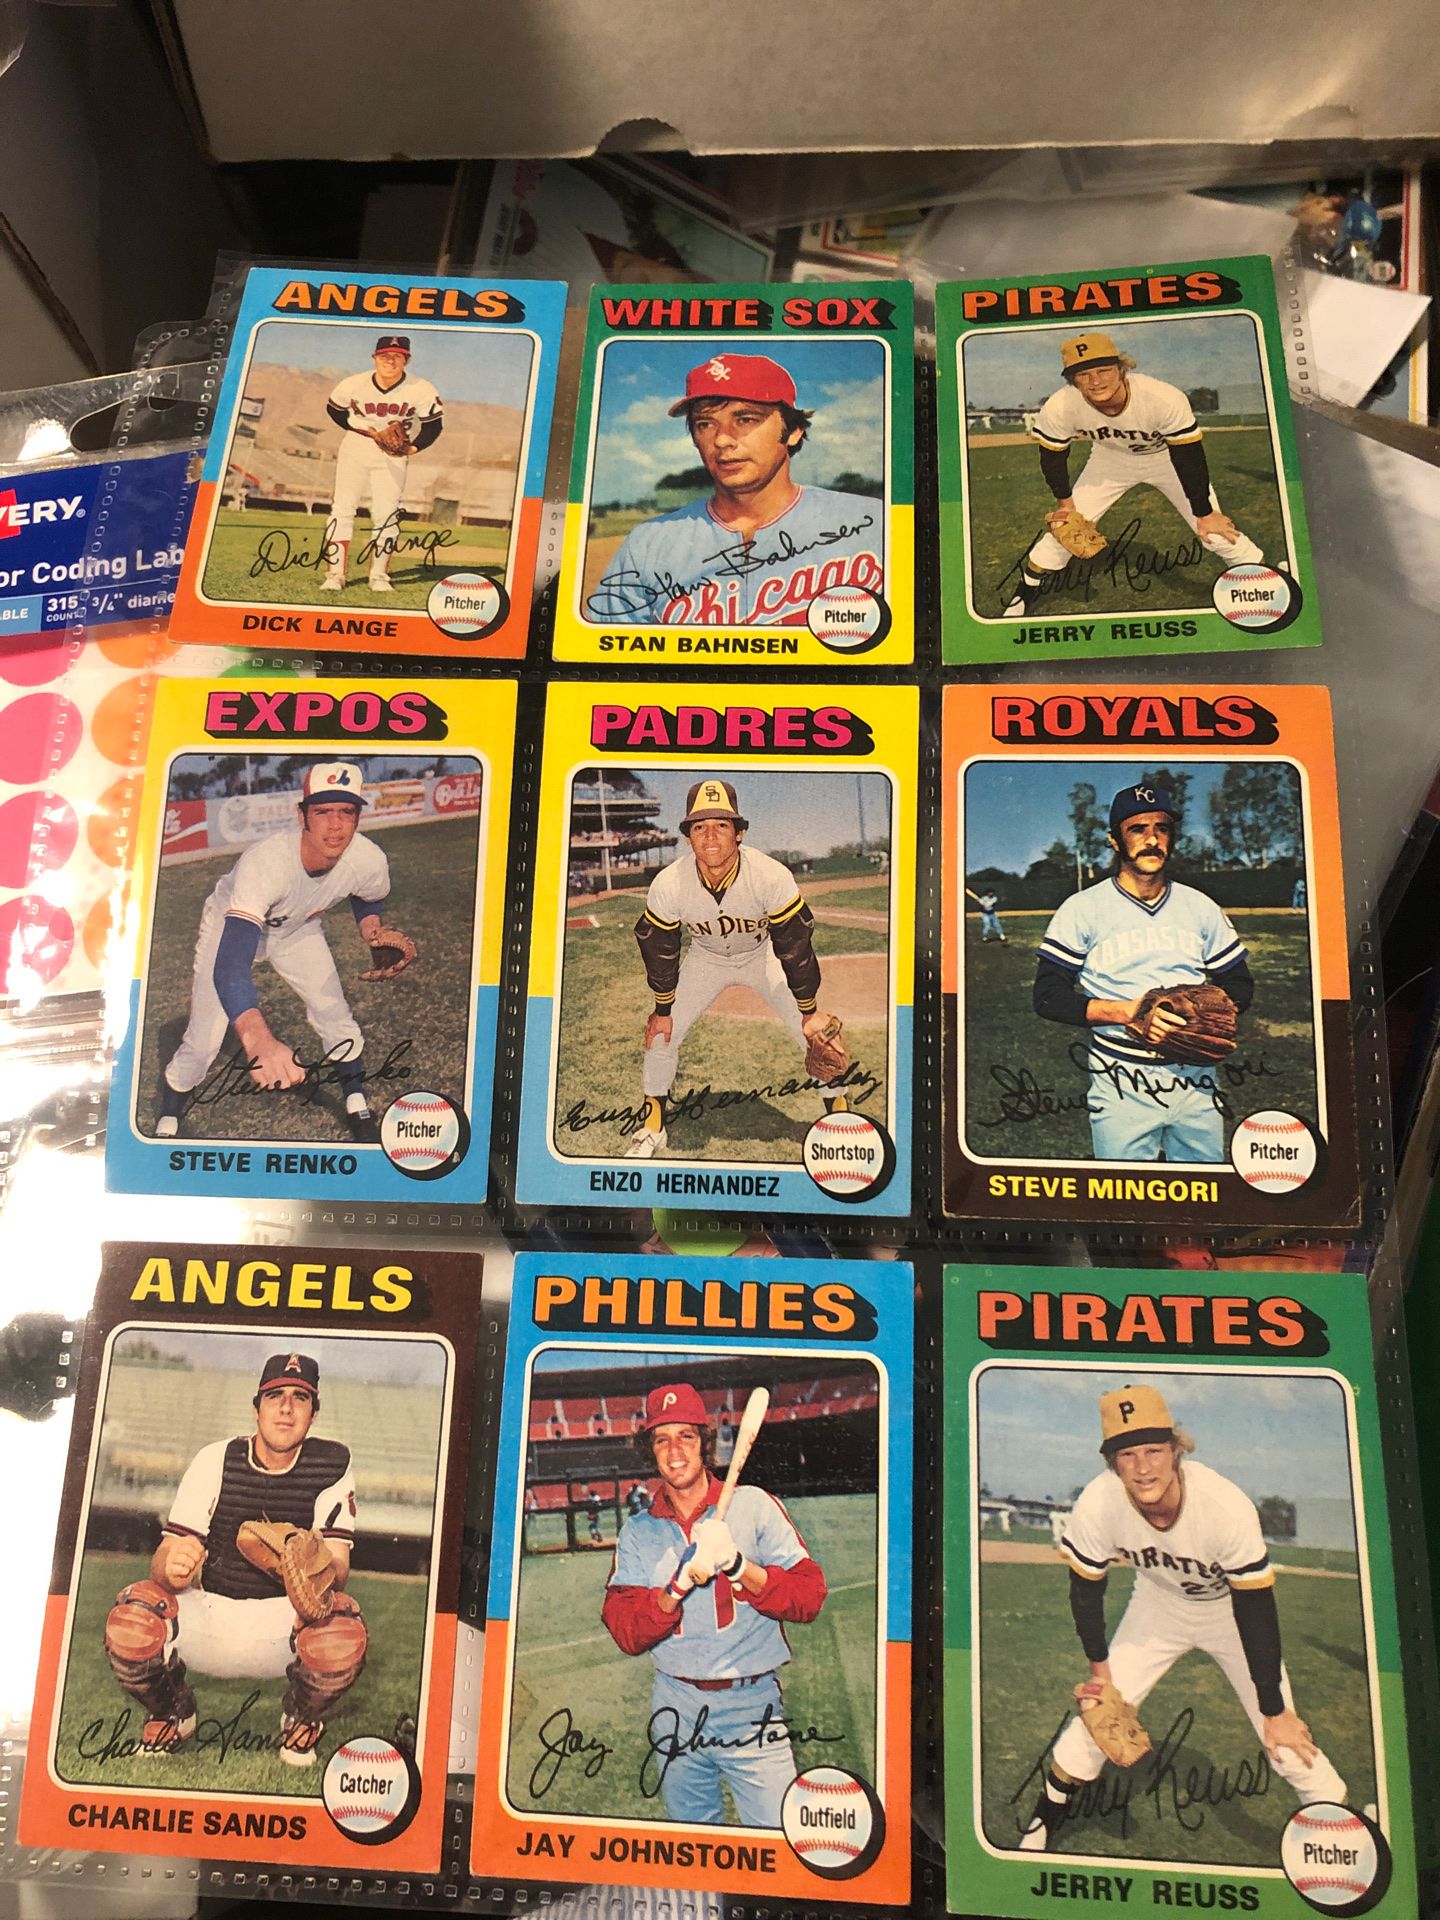 Beautiful 1975 topps baseball card lot #2 of 18 cards all for $4